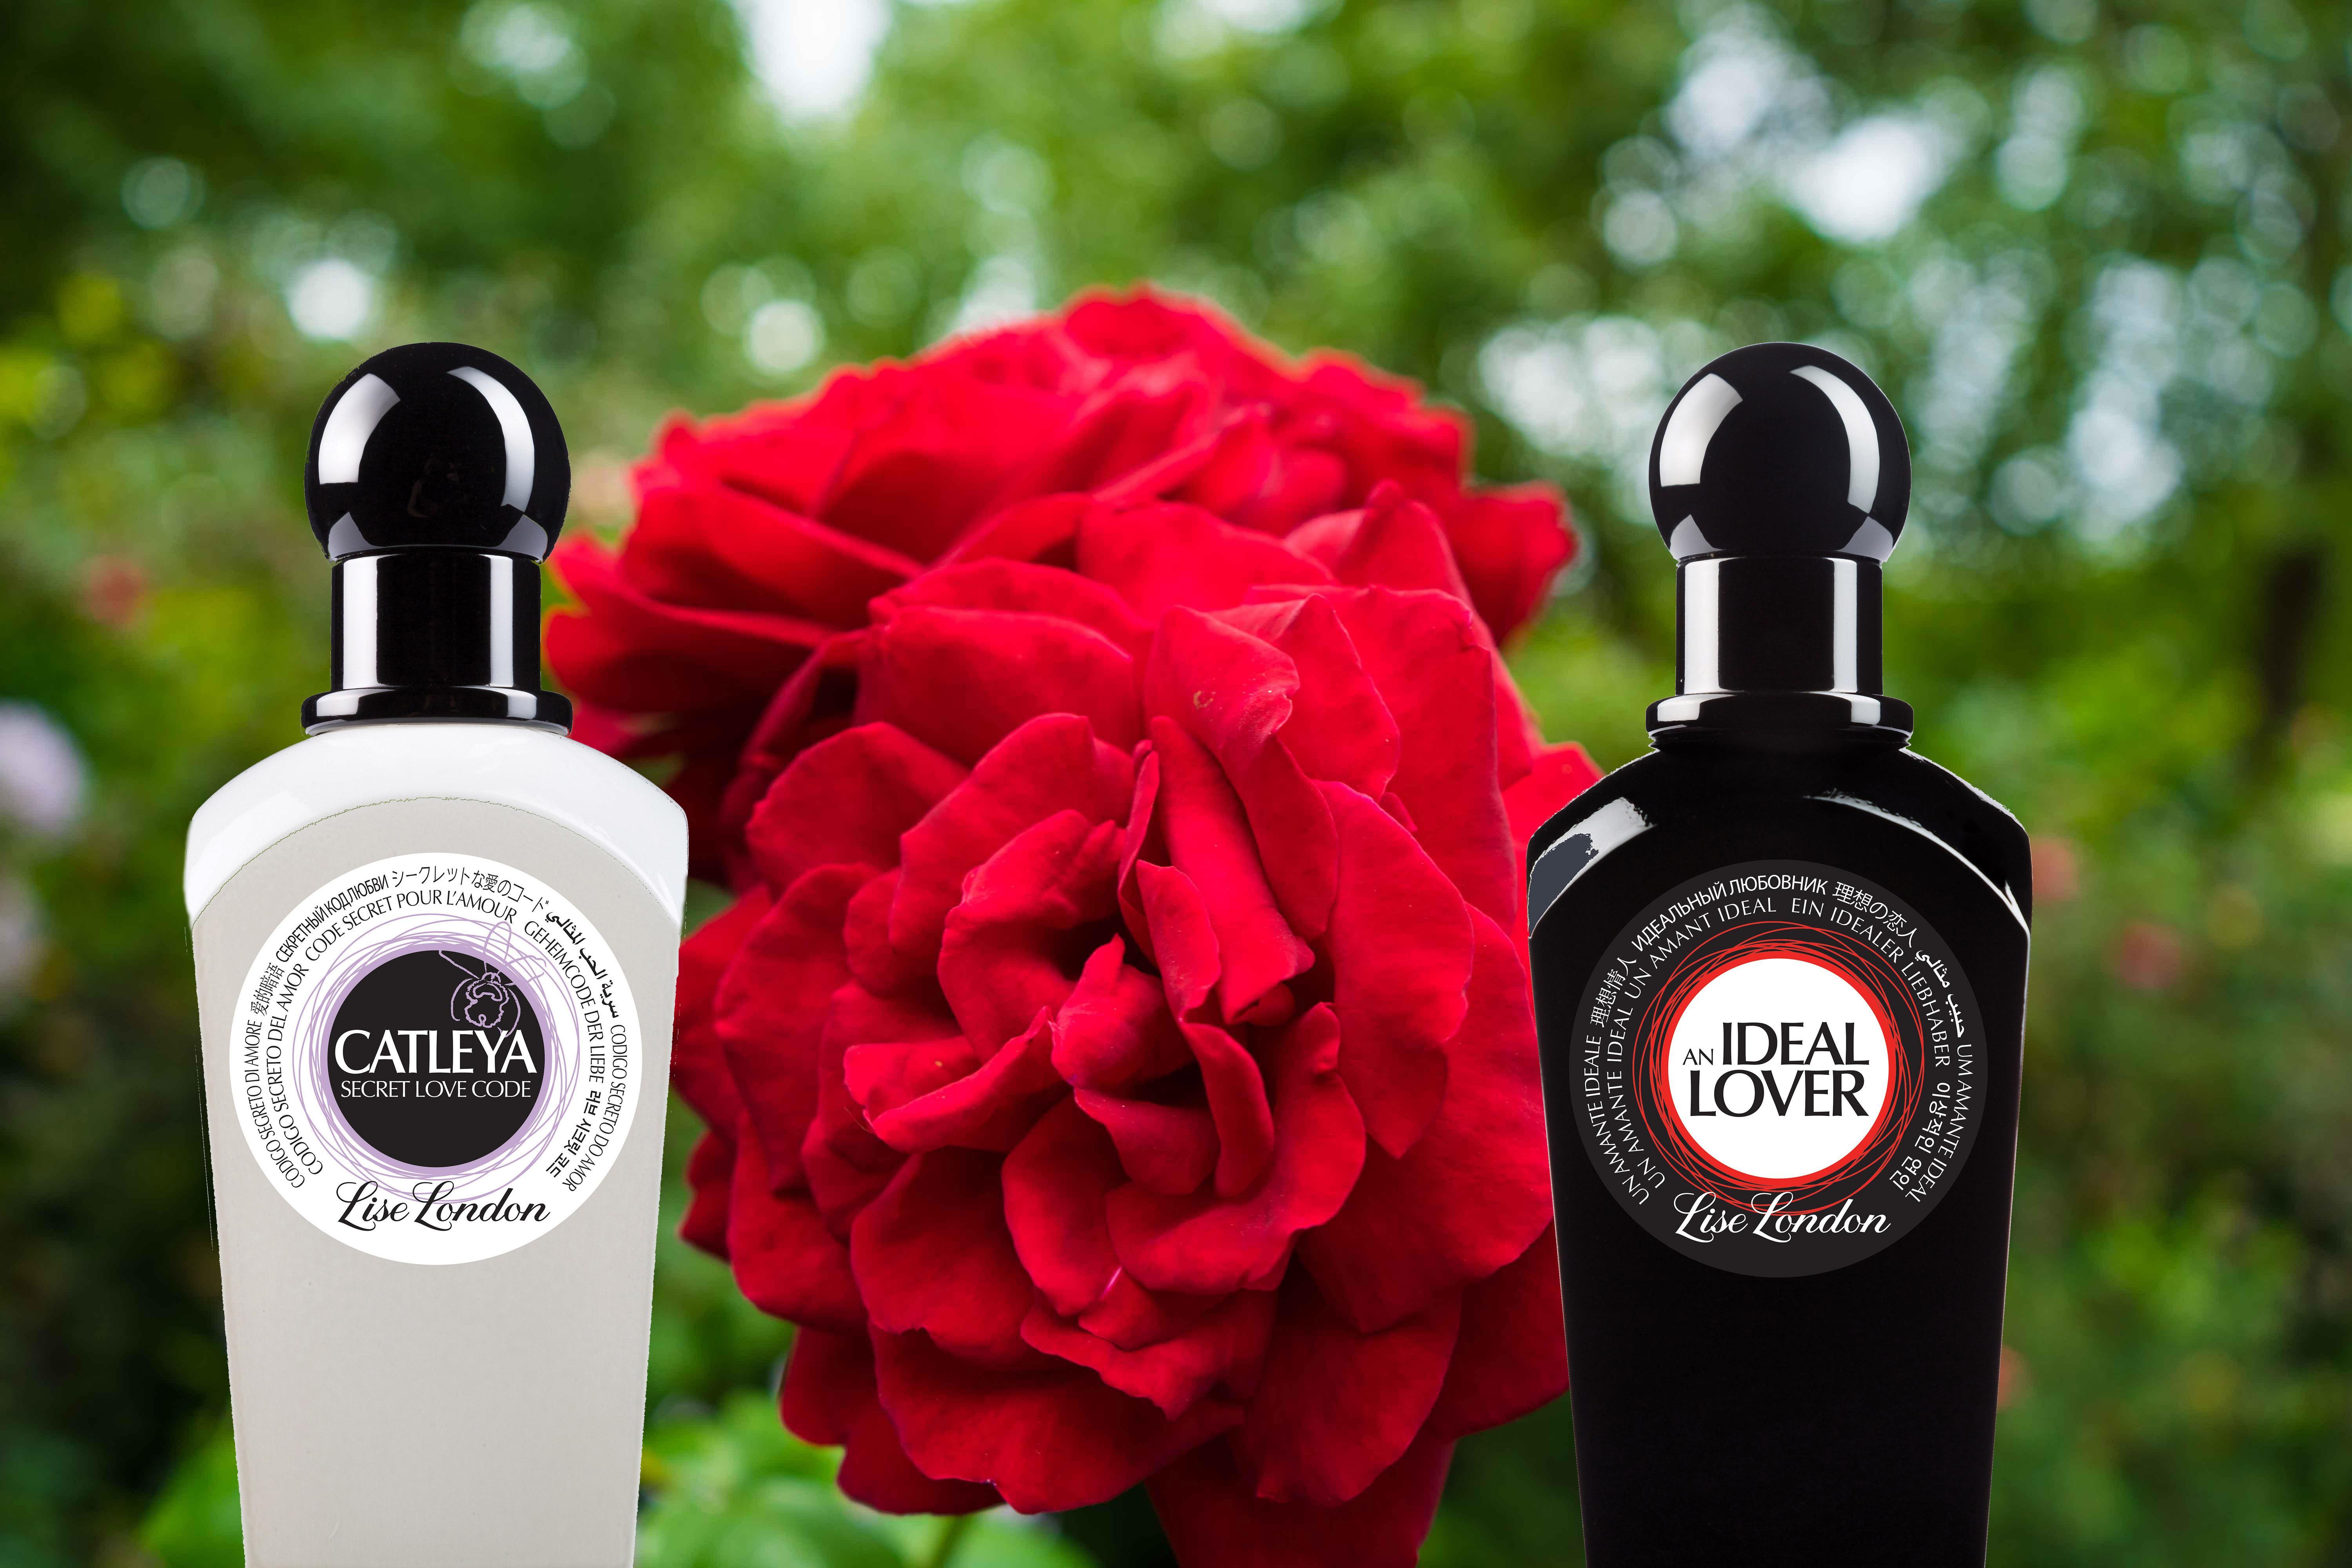 THE IDEAL LOVERS ROMANTIC LIFESTYLE PERFUMES